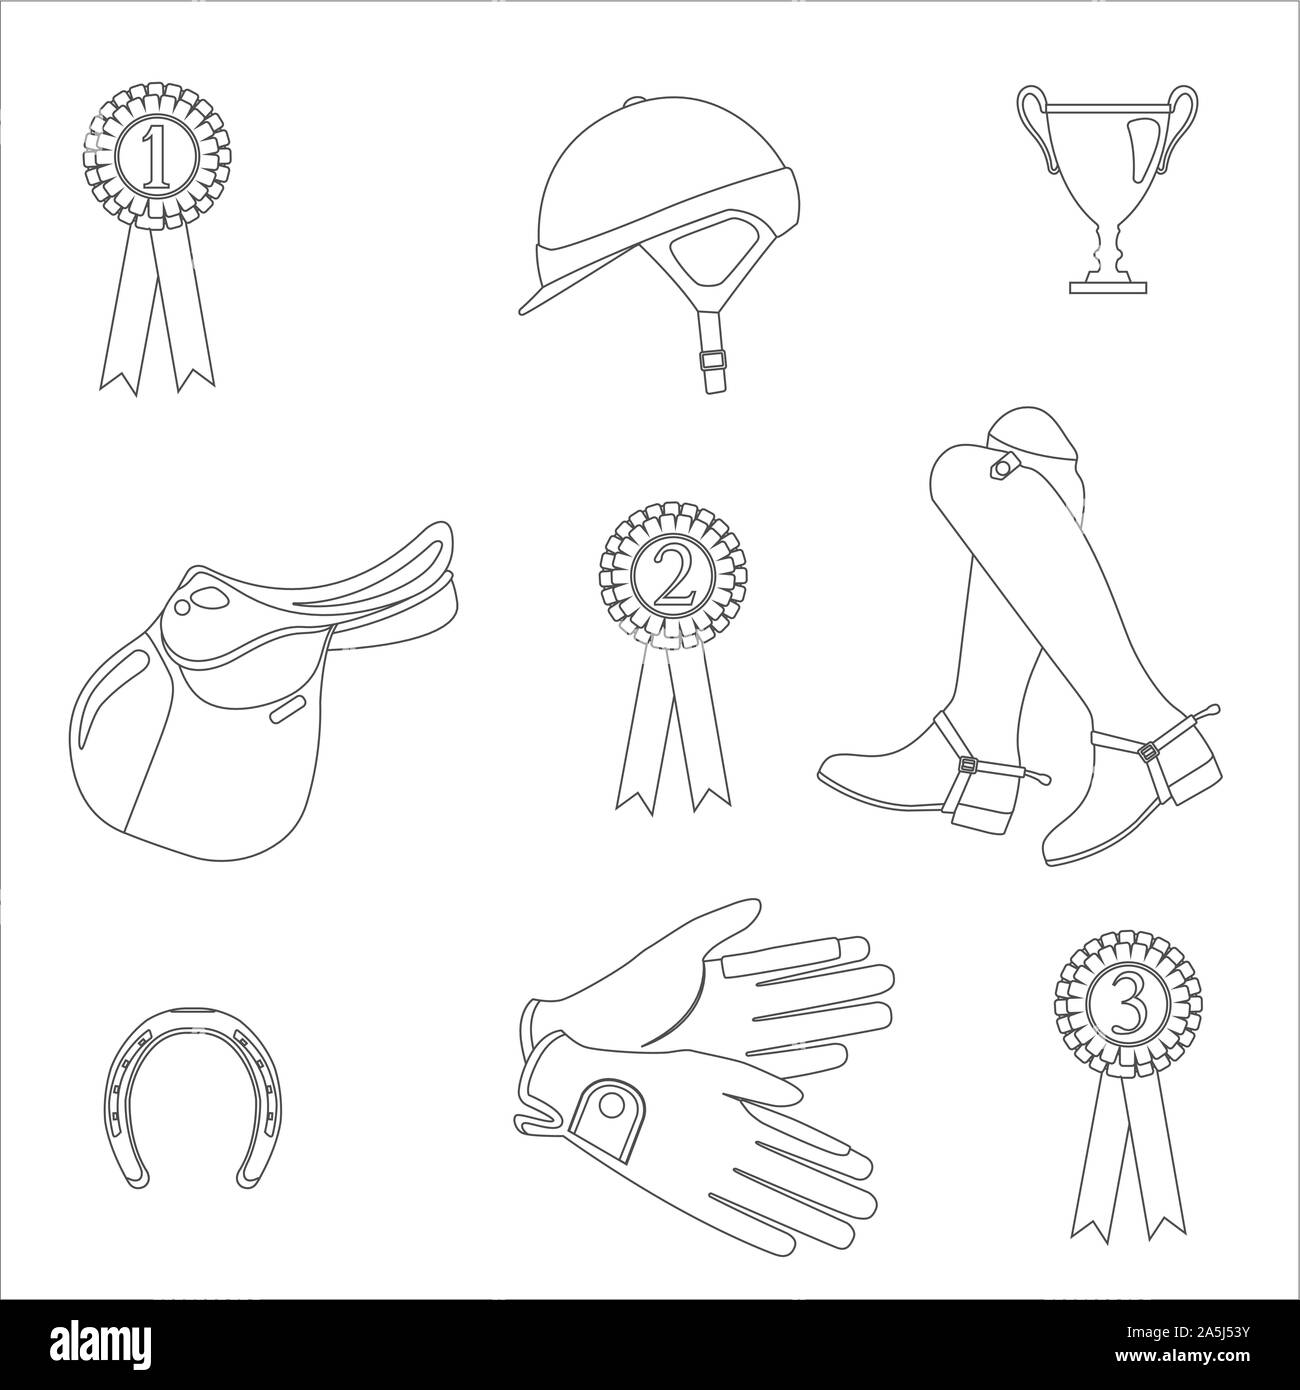 Horse jumping gear - seamless vector pattern on white background Stock Vector